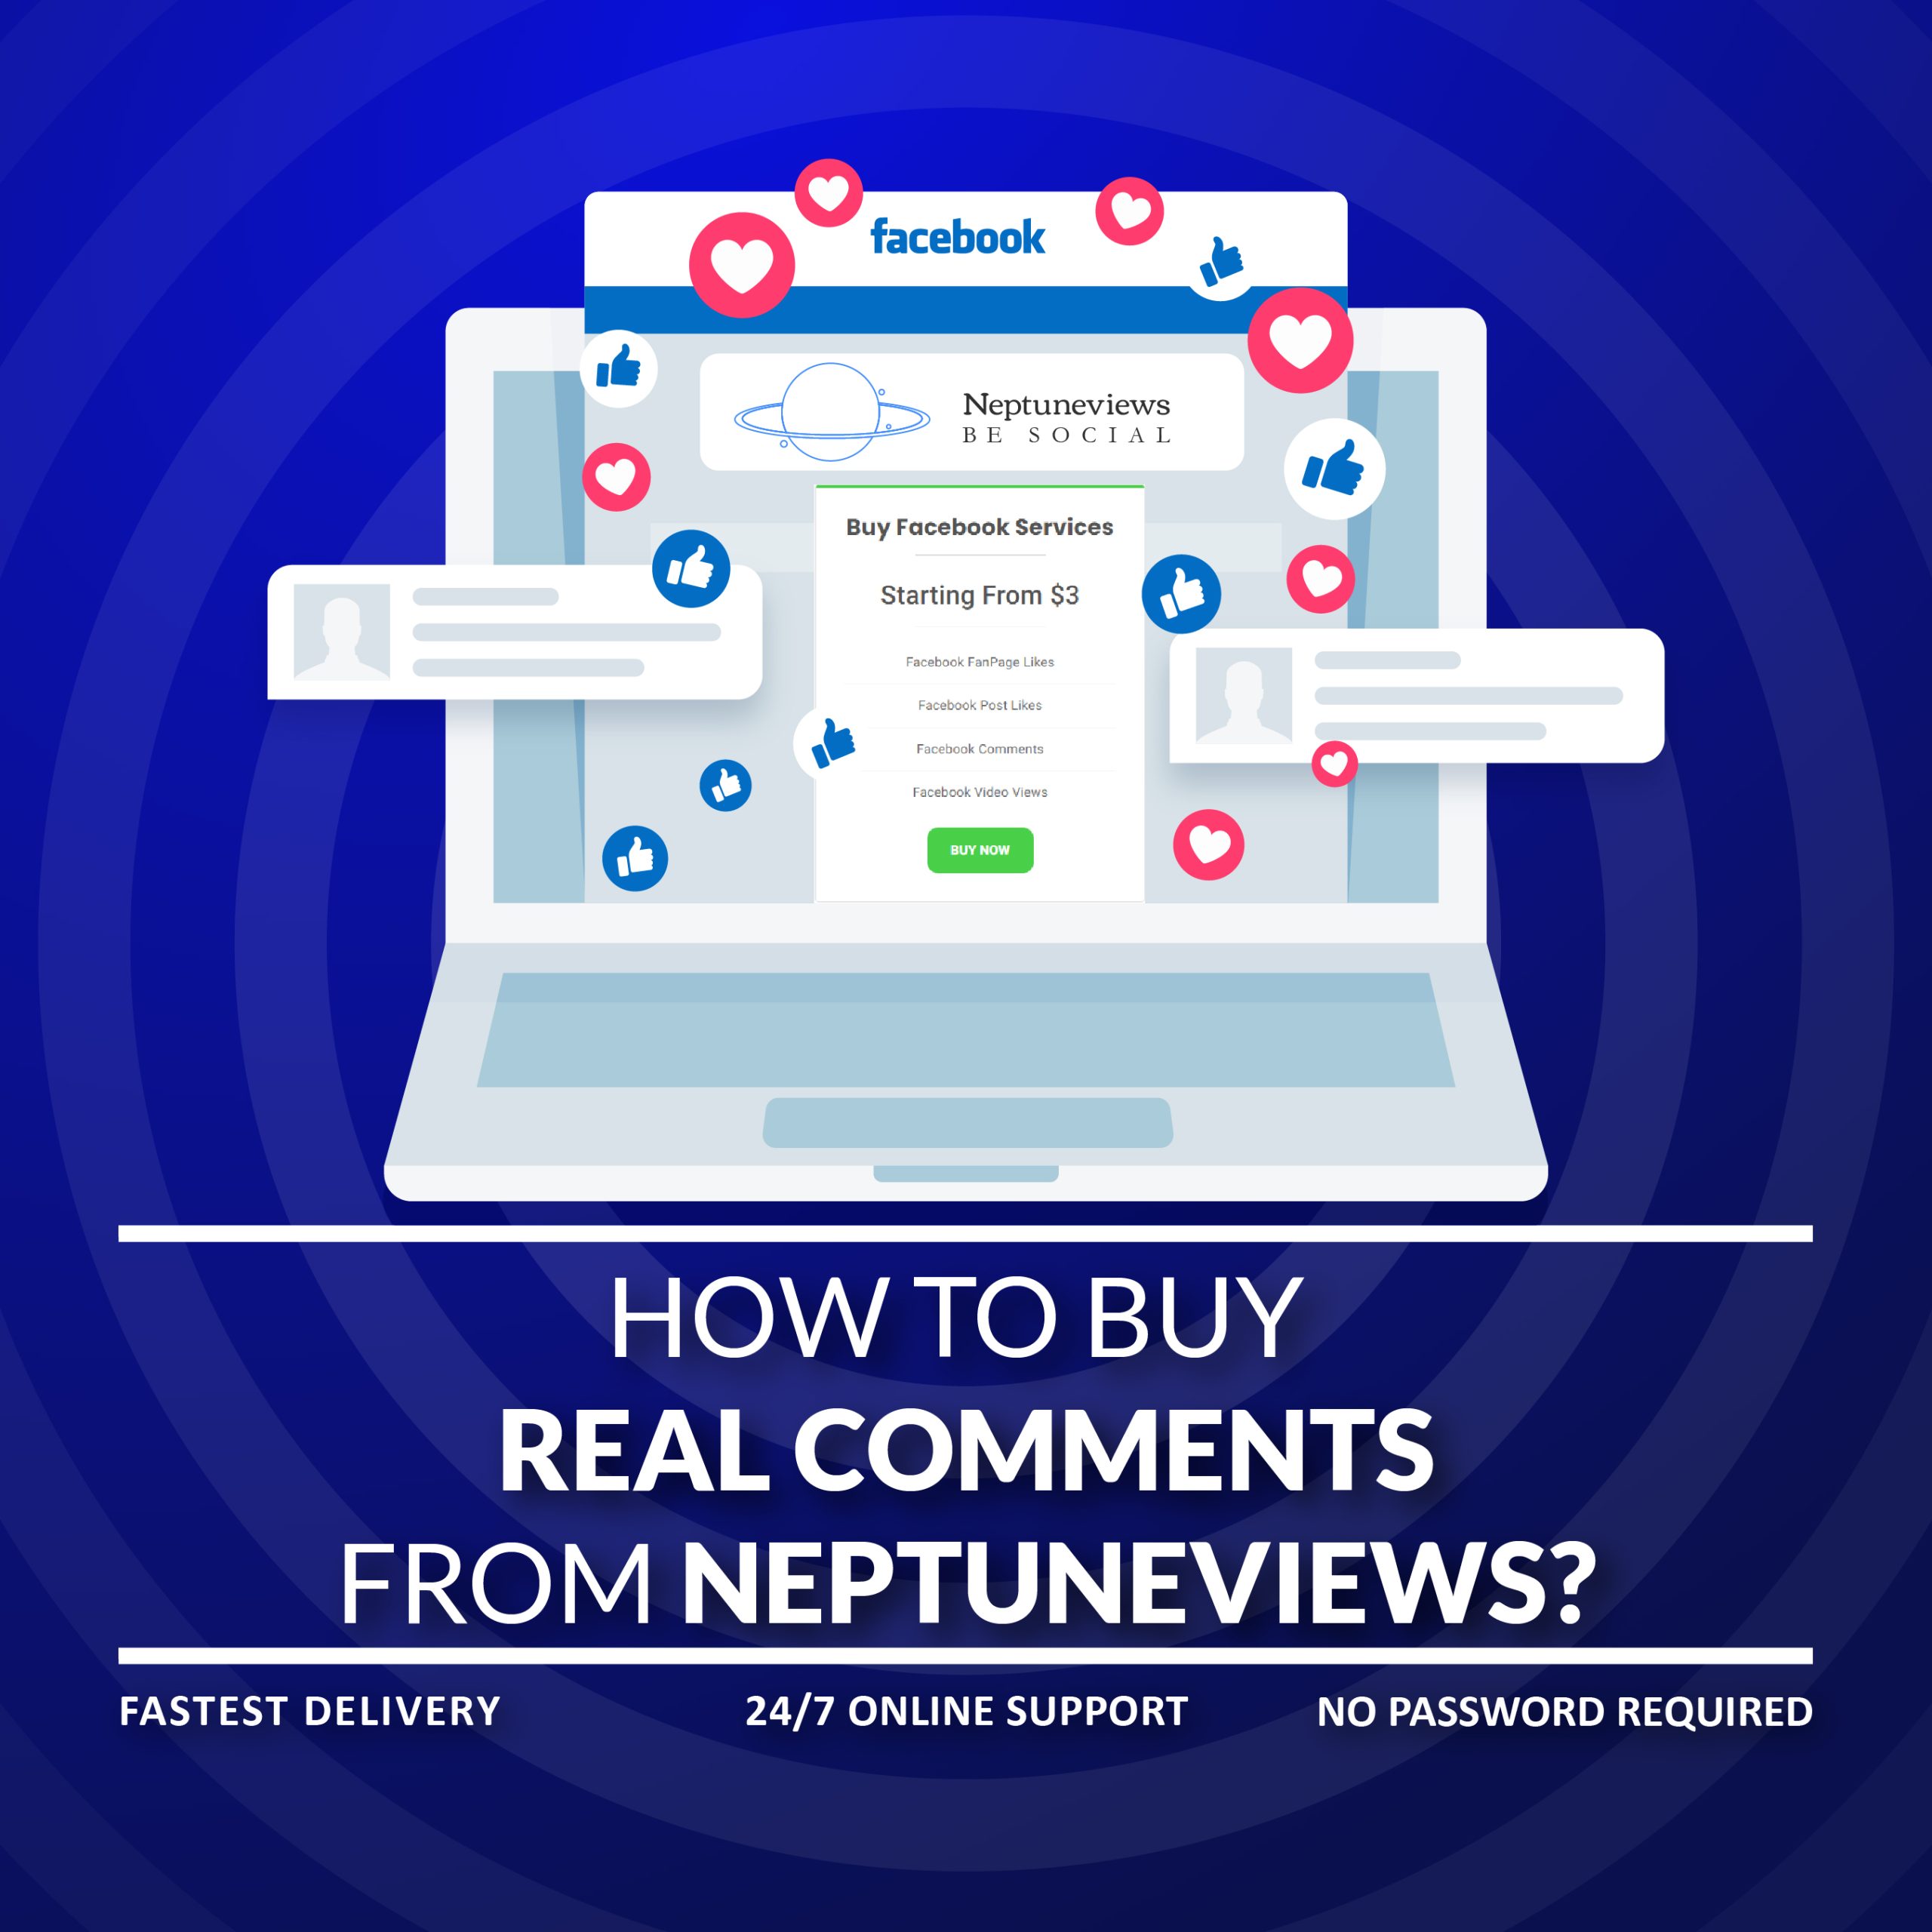 How to Buy Real Comments from Neptuneviews?